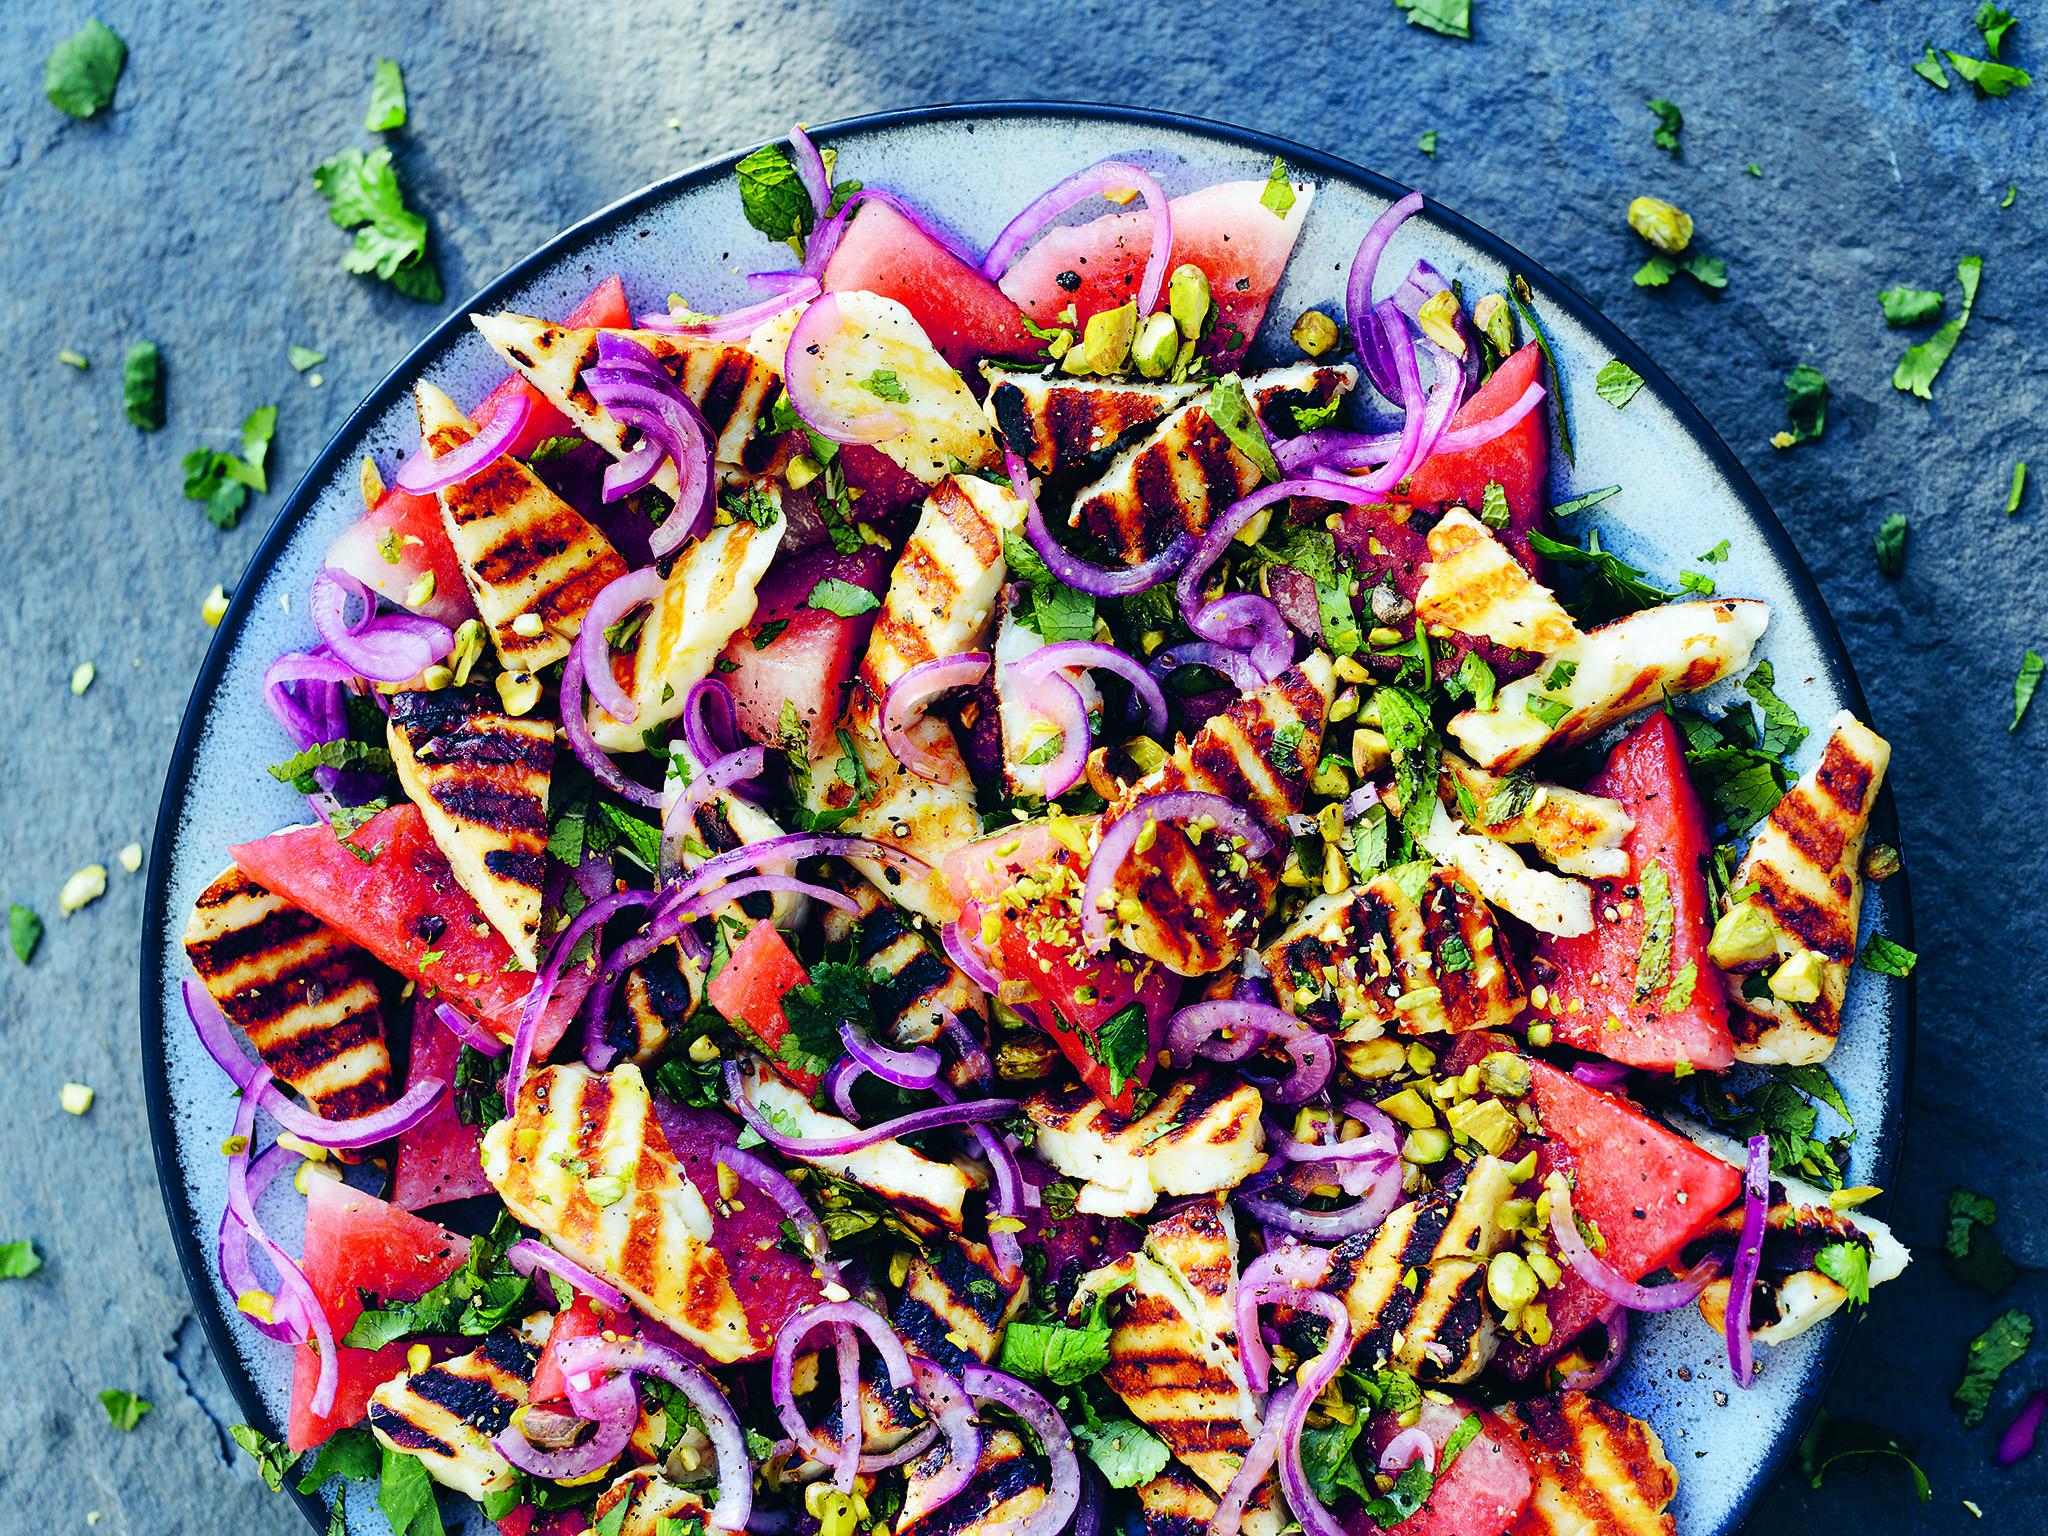 The watermelon, halloumi and pickled red onion salad recipe from Charred (Jason Ingram)